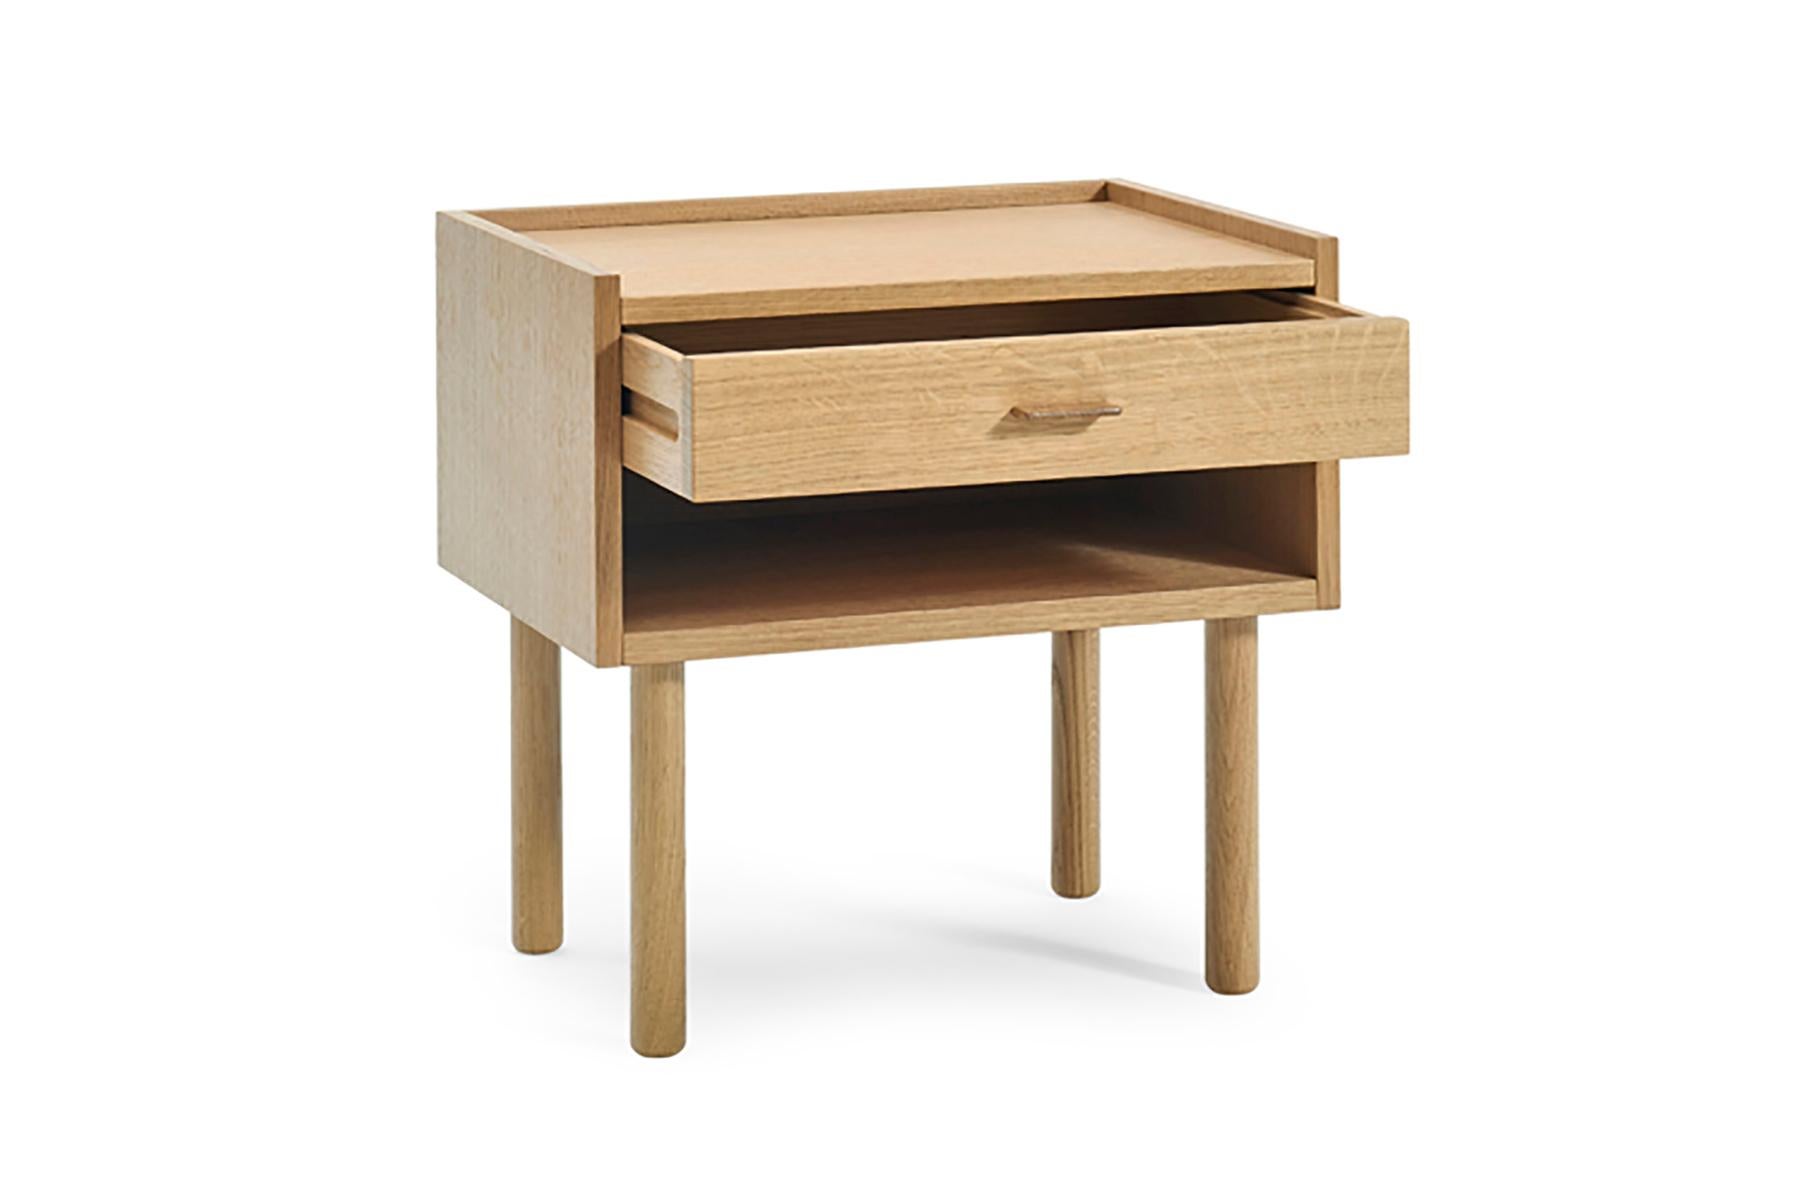 Designed by Hans Wegner for GETAMA in 1969, the 430 nightstand features unparalleled craftsmanship. This chest is hand built at GETAMA’s factory in Gedsted, Denmark by skilled cabinetmakers using traditional Scandinavian techniques.

Lead time: 6-8